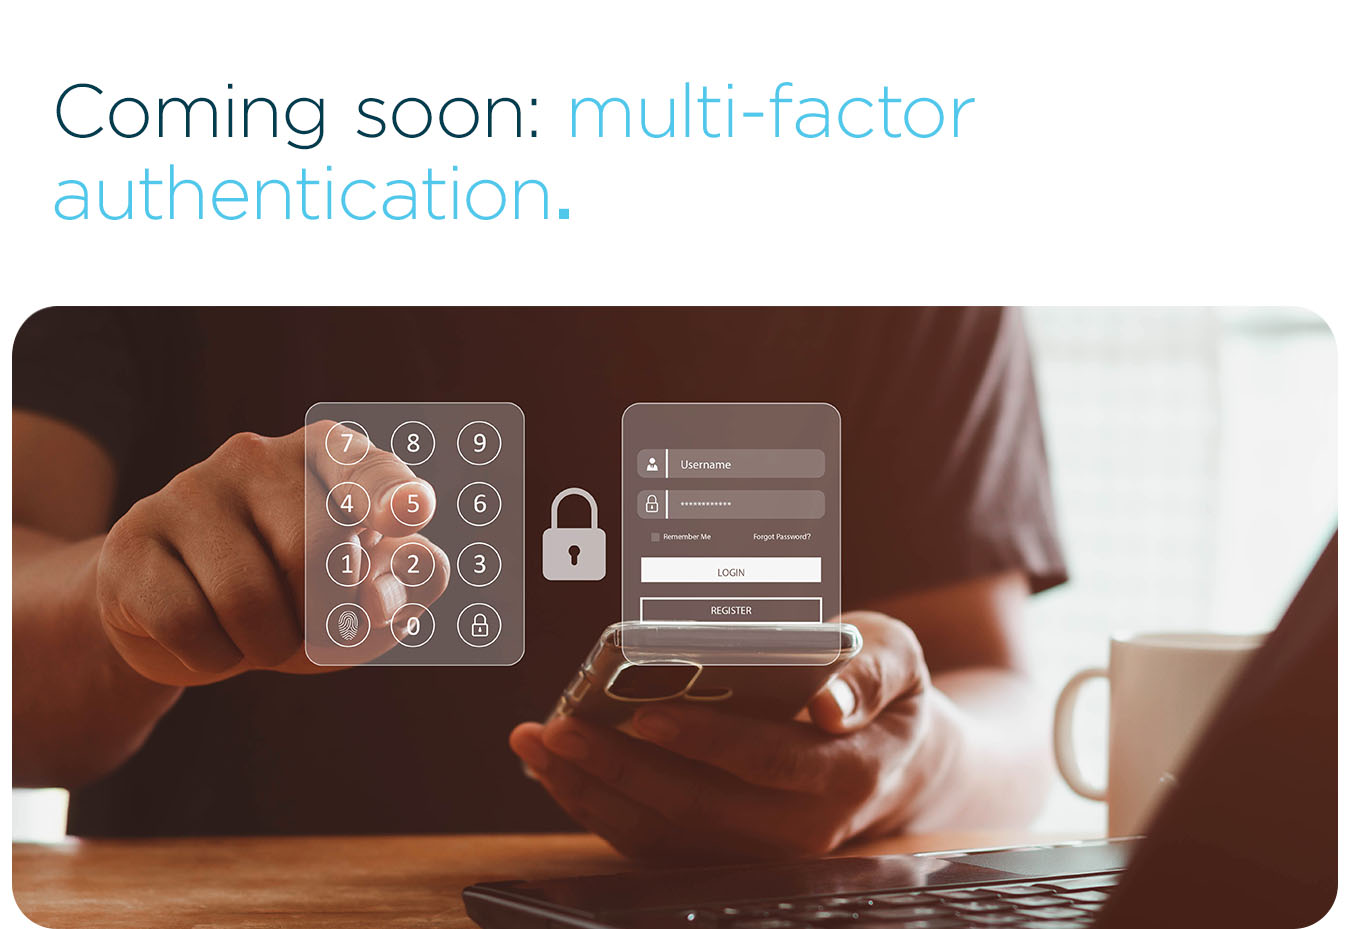 Coming soon: multi-factor authentication.